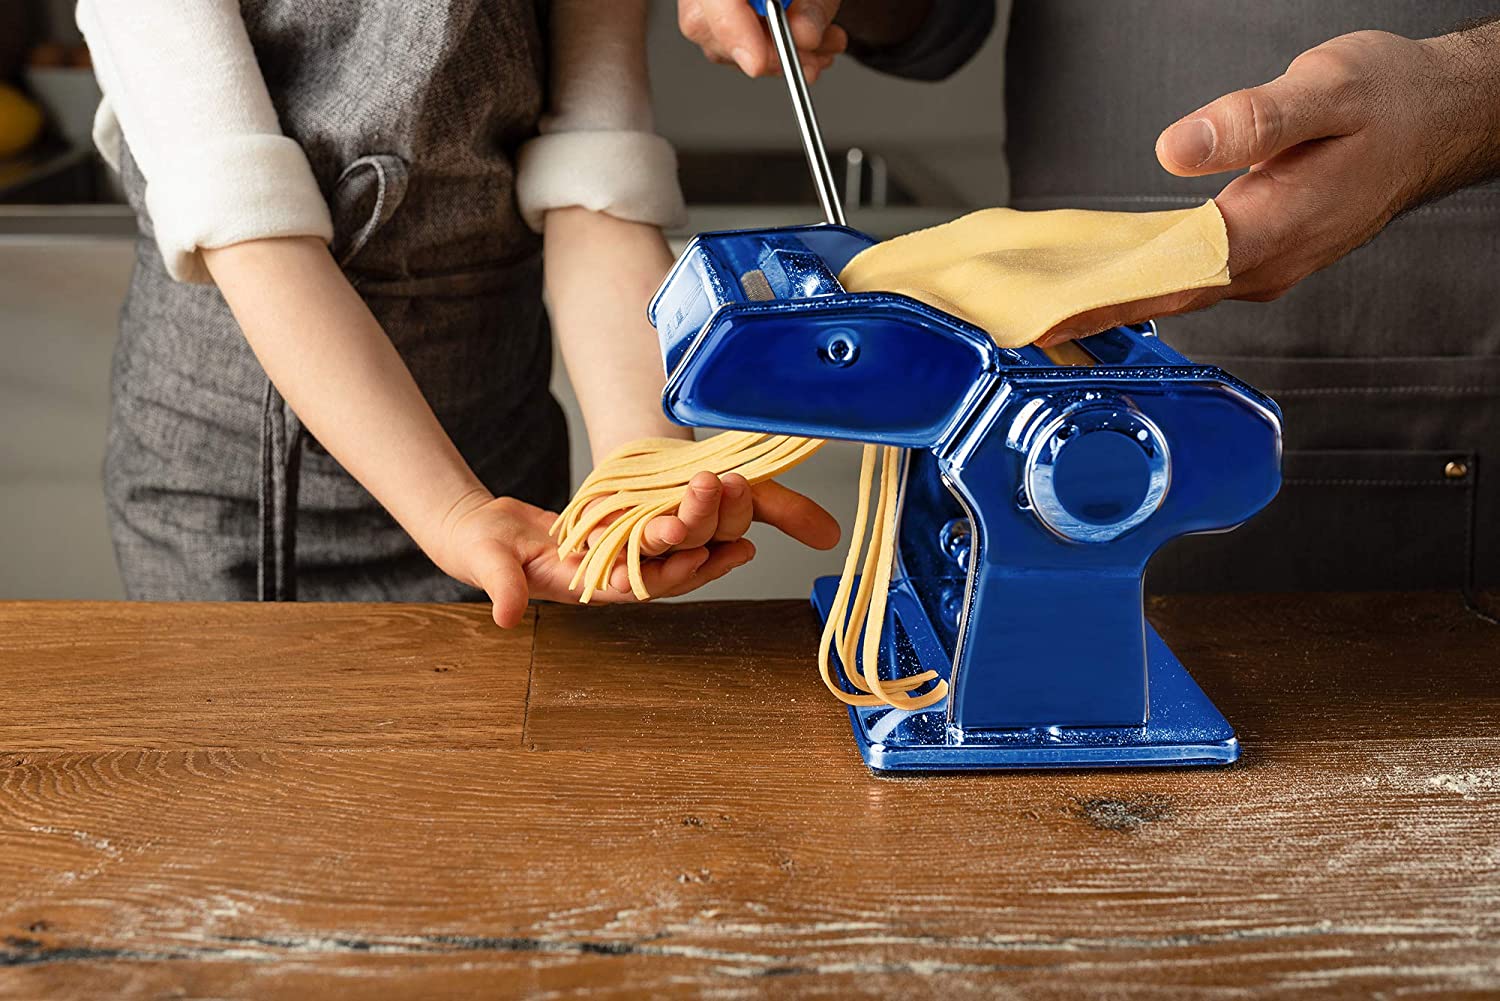 Marcato Atlas 150 Pasta Machine, Made In Italy, Blue, Includes Pasta  Cutter, Hand Crank, And Instructions